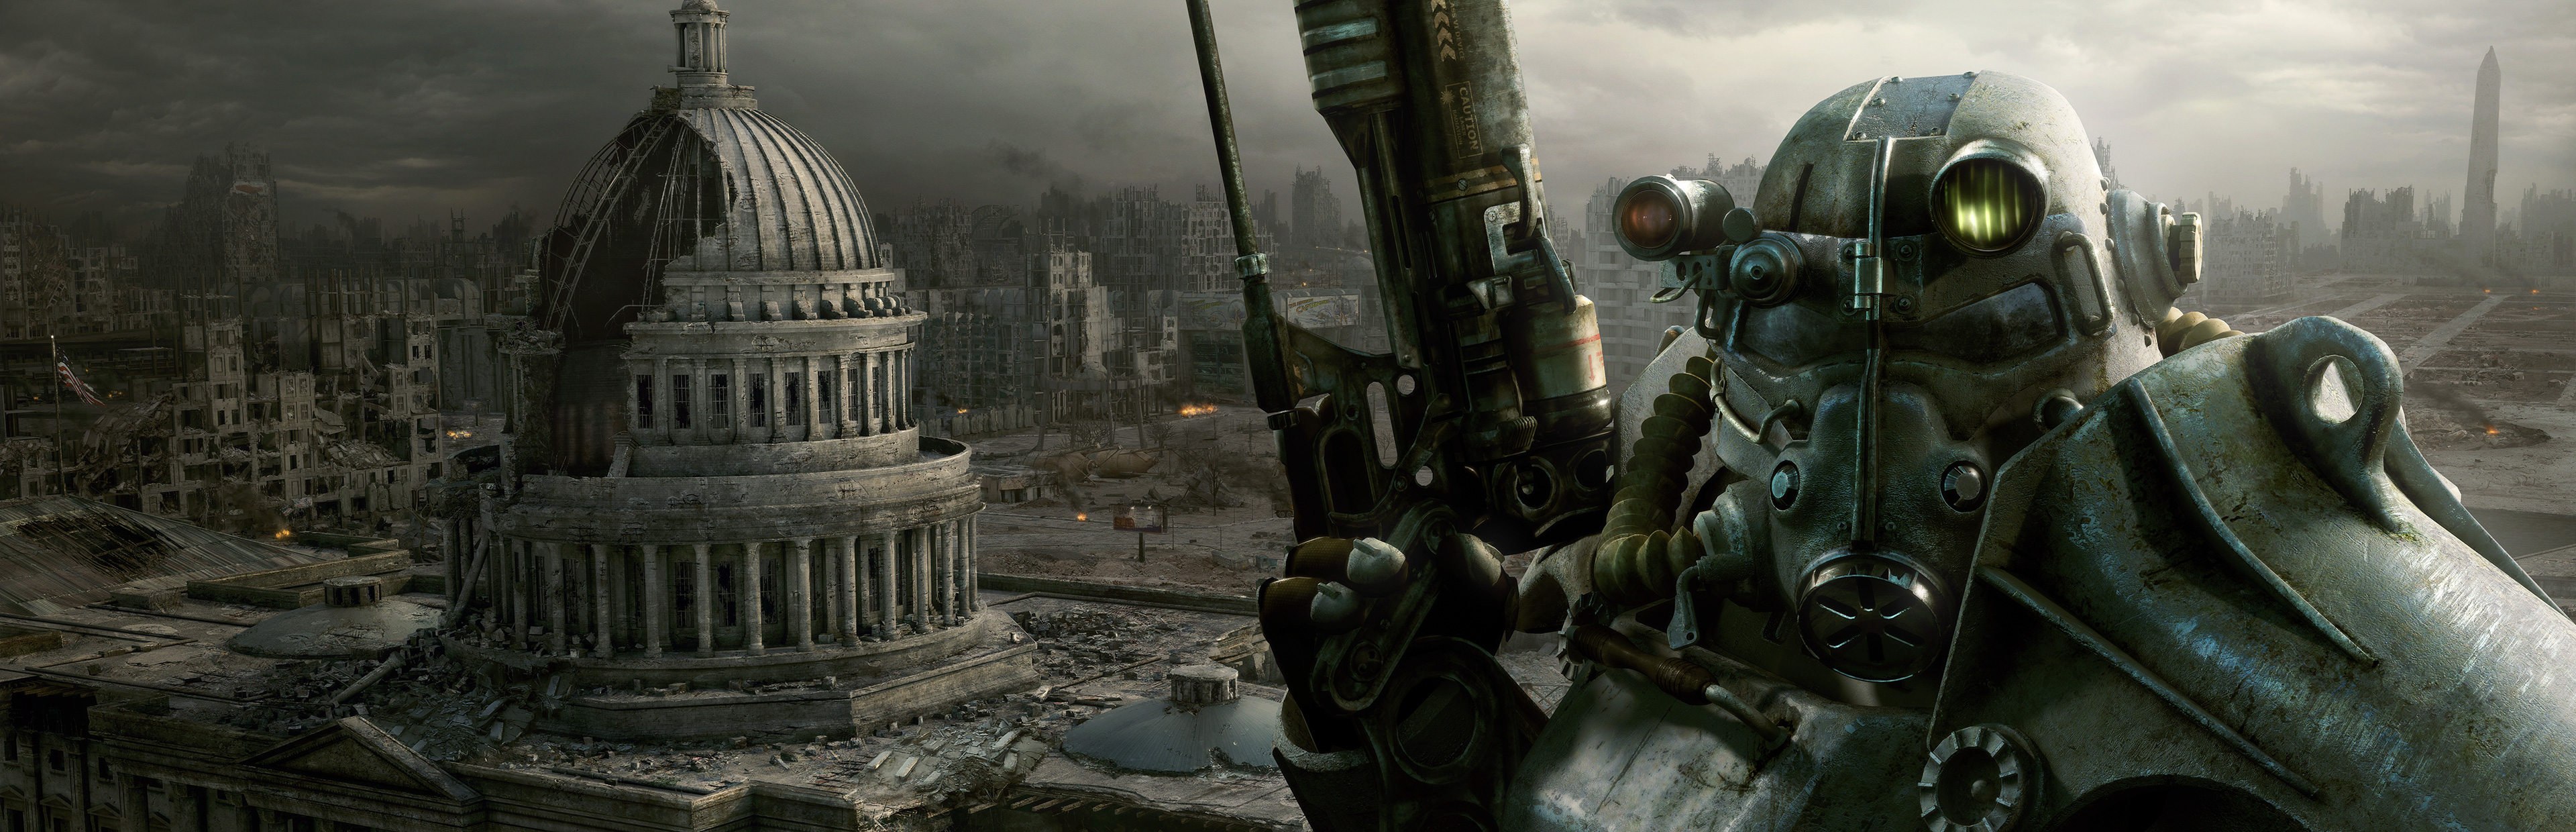 Fallout 3: Game of the Year Edition - SteamGridDB